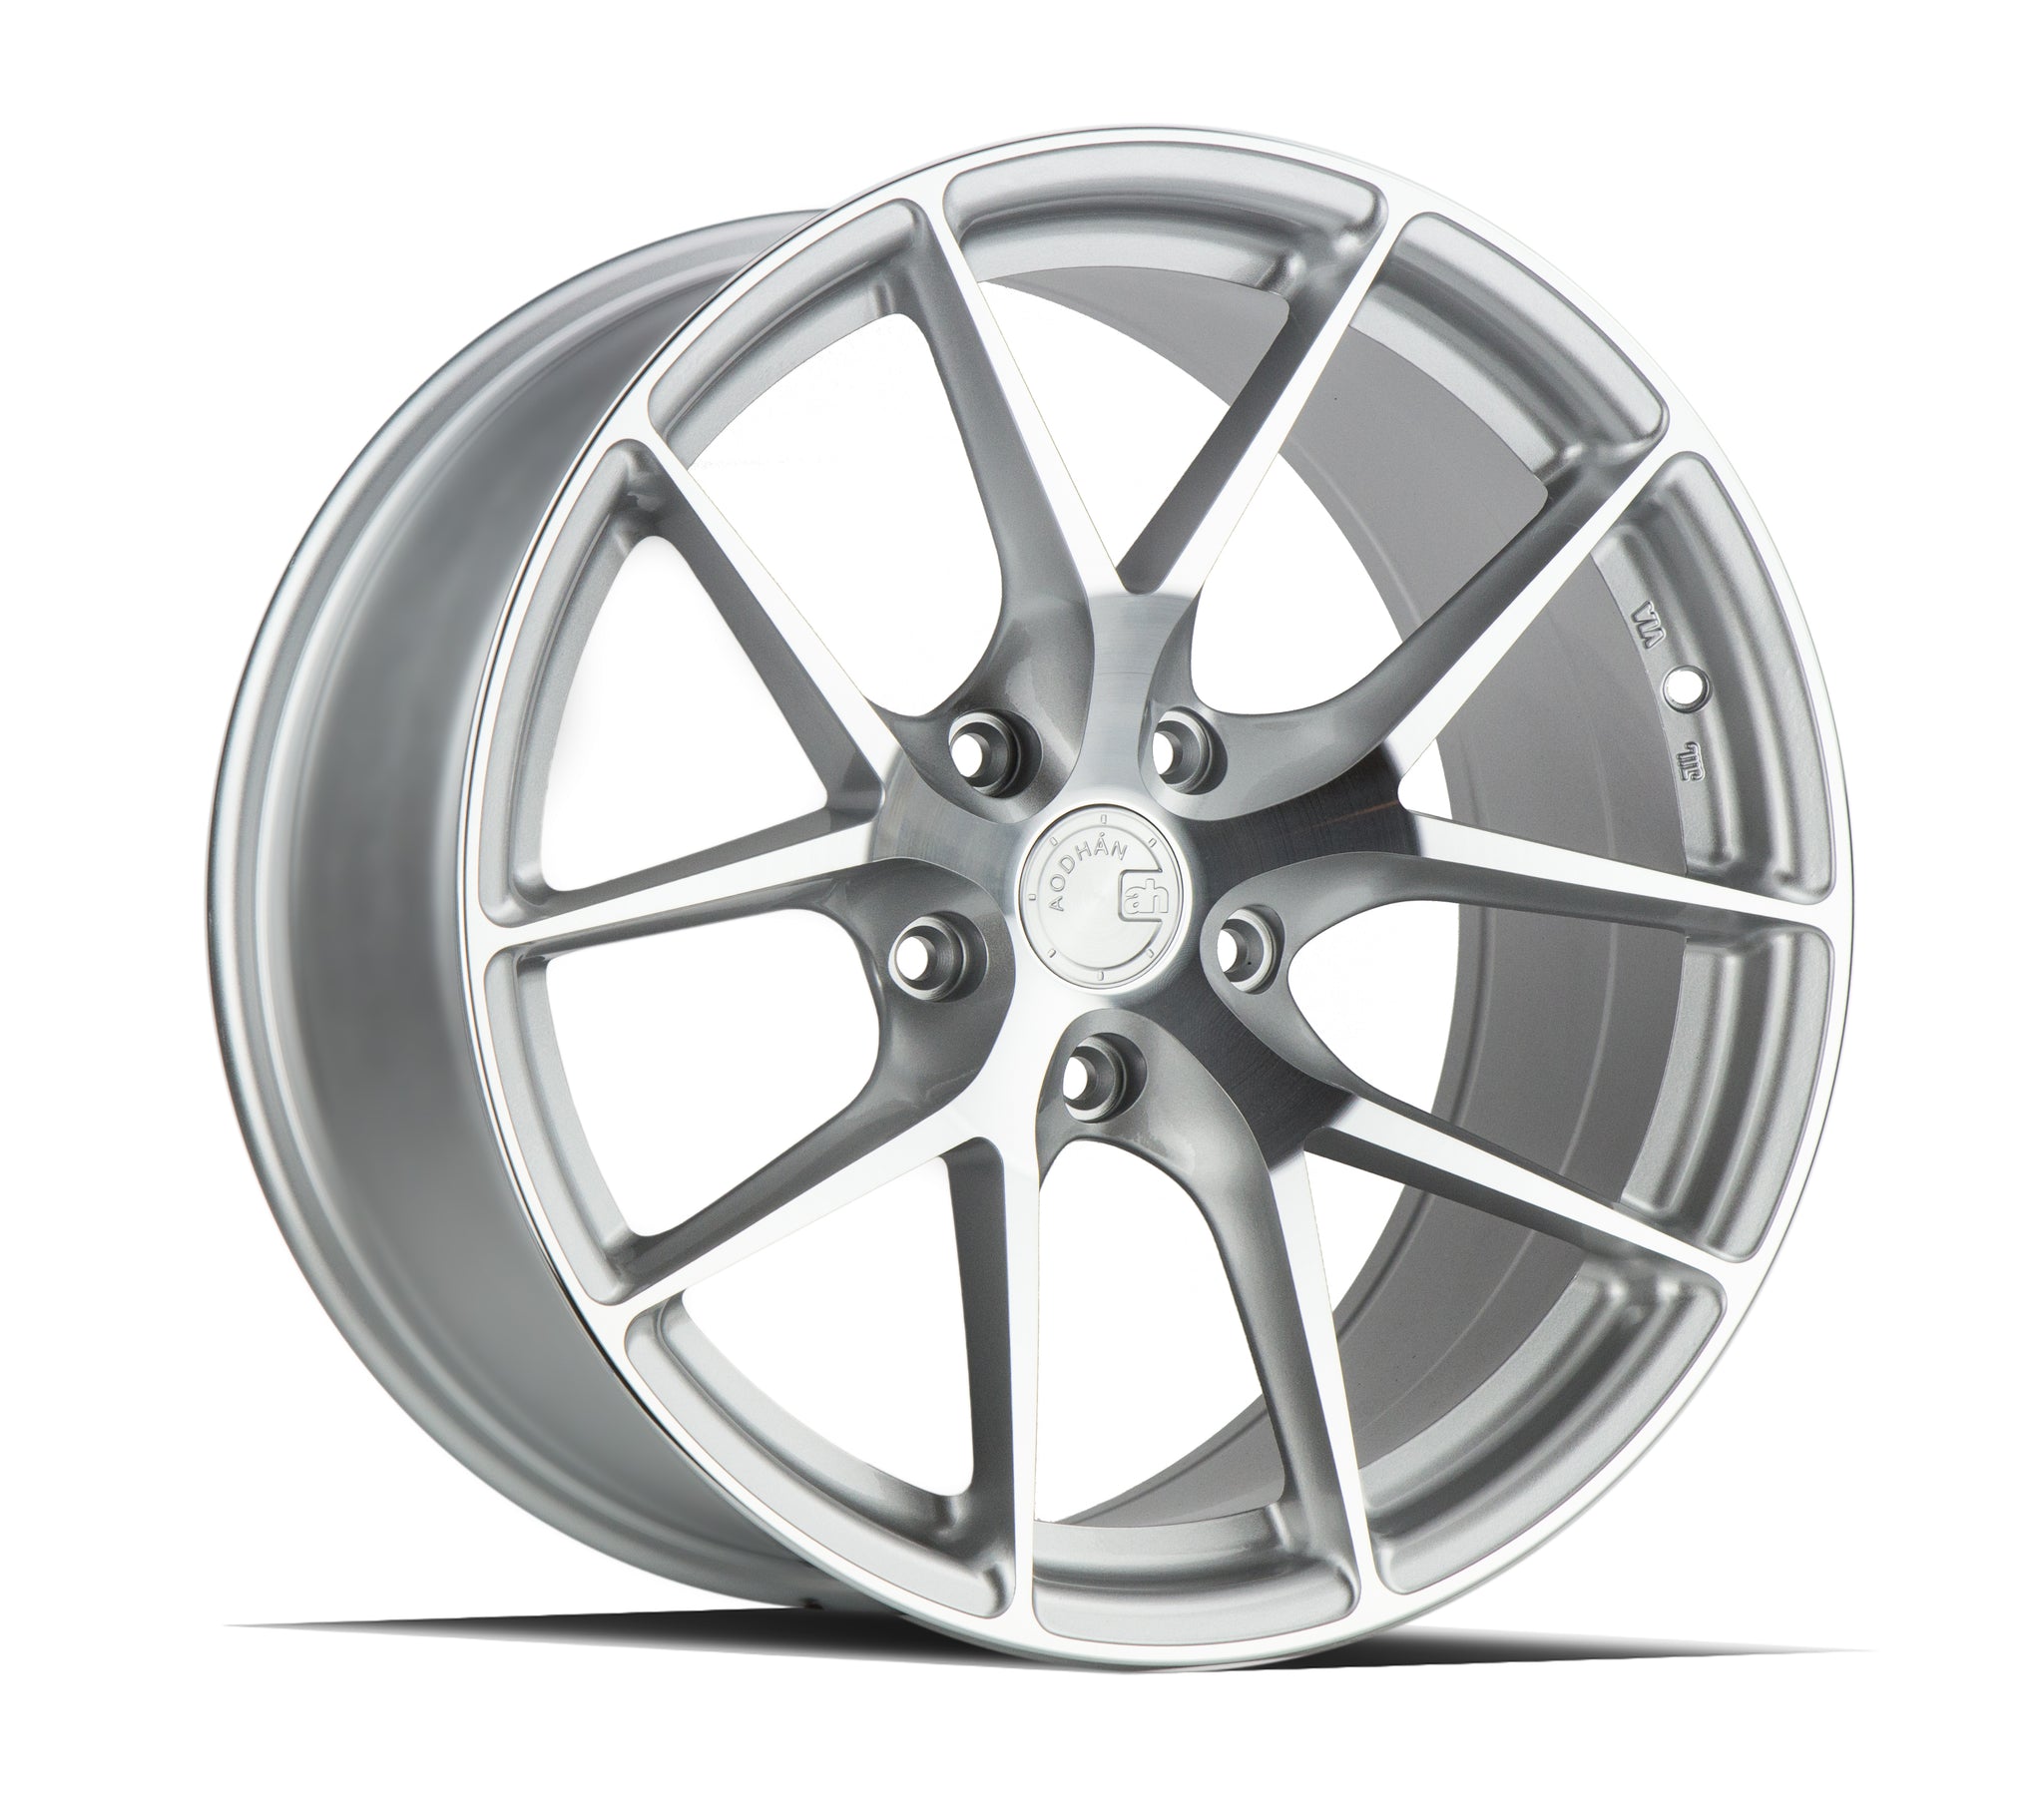 AODHAN AFF7 SILVER WITH MACHINED FACE WHEELS | 18X8.5 | 5X120 | OFFSET: 35MM | CB: 72.6MM